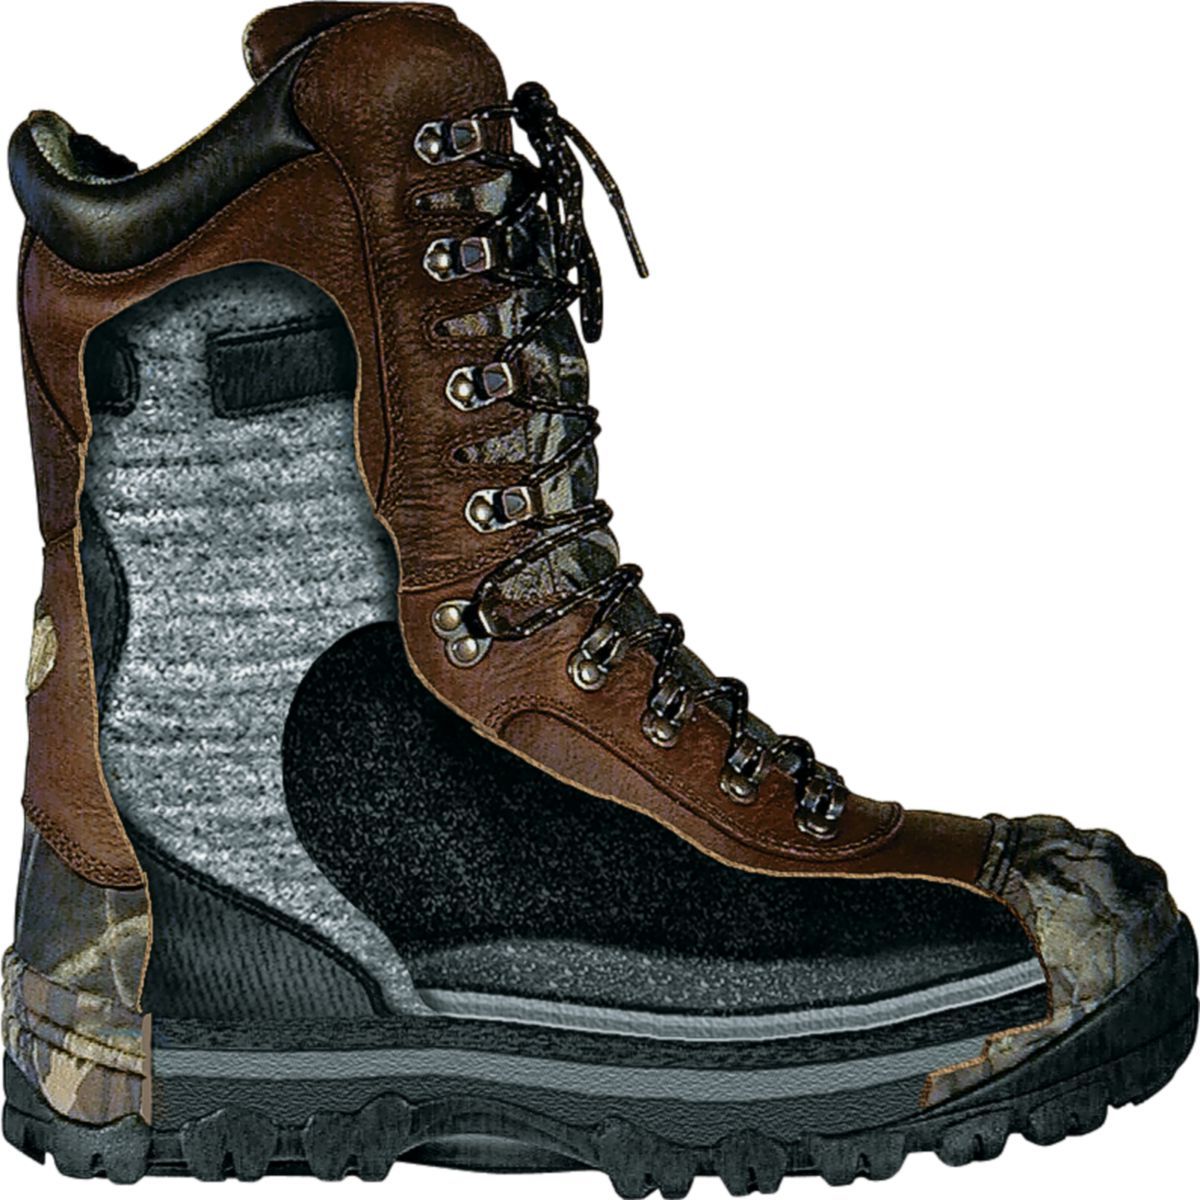 Cabela's Predator™ Extreme Pac Boots – Brown